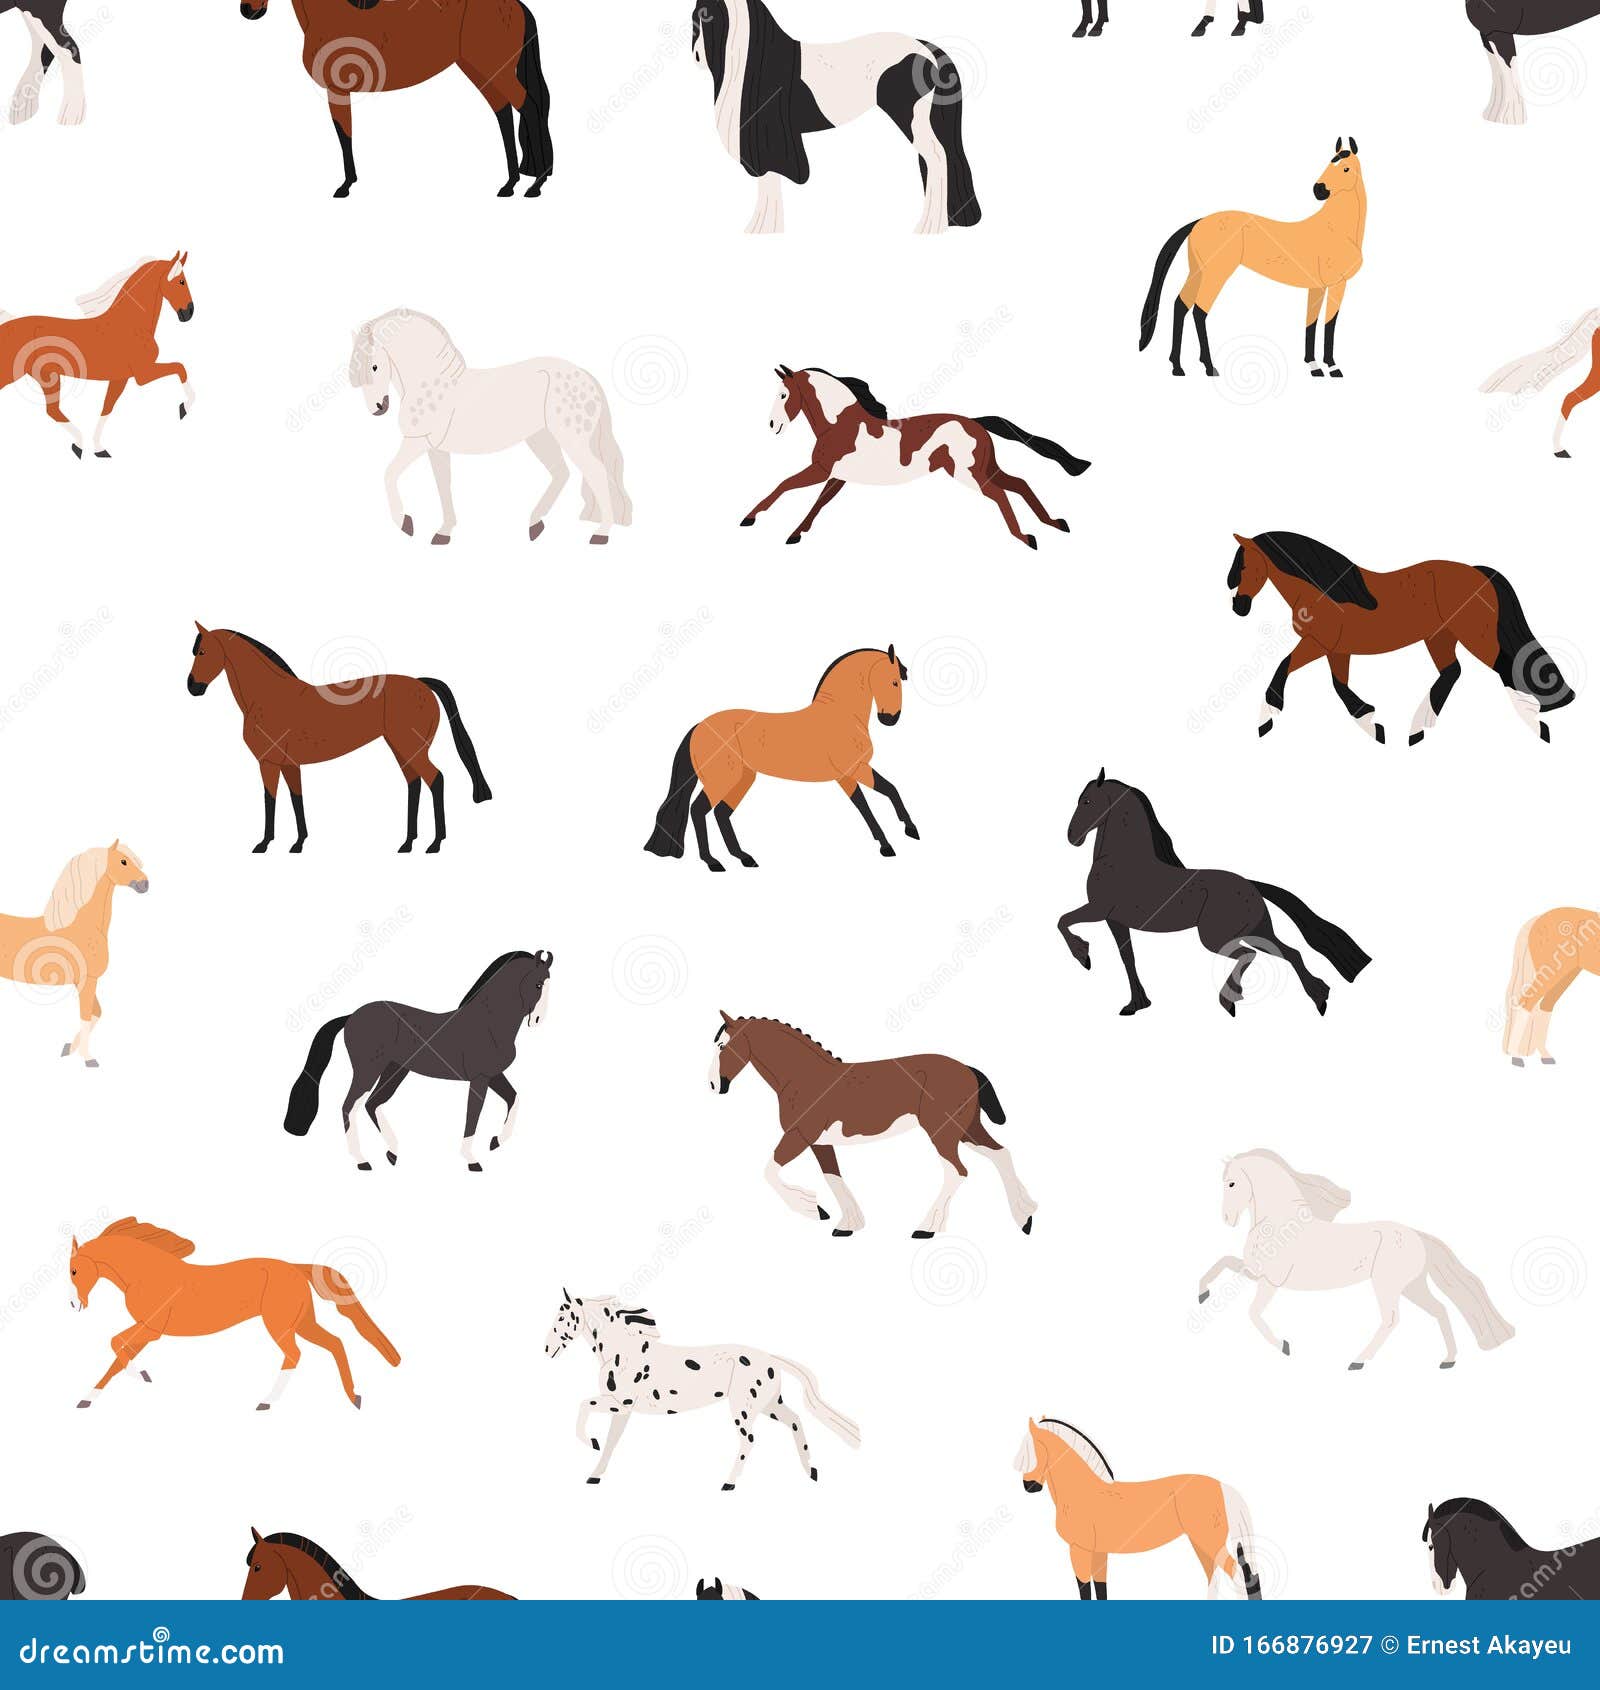 horse breeding flat  seamless pattern. purebreed mares and stallions decorative texture. thoroughbred racehorses